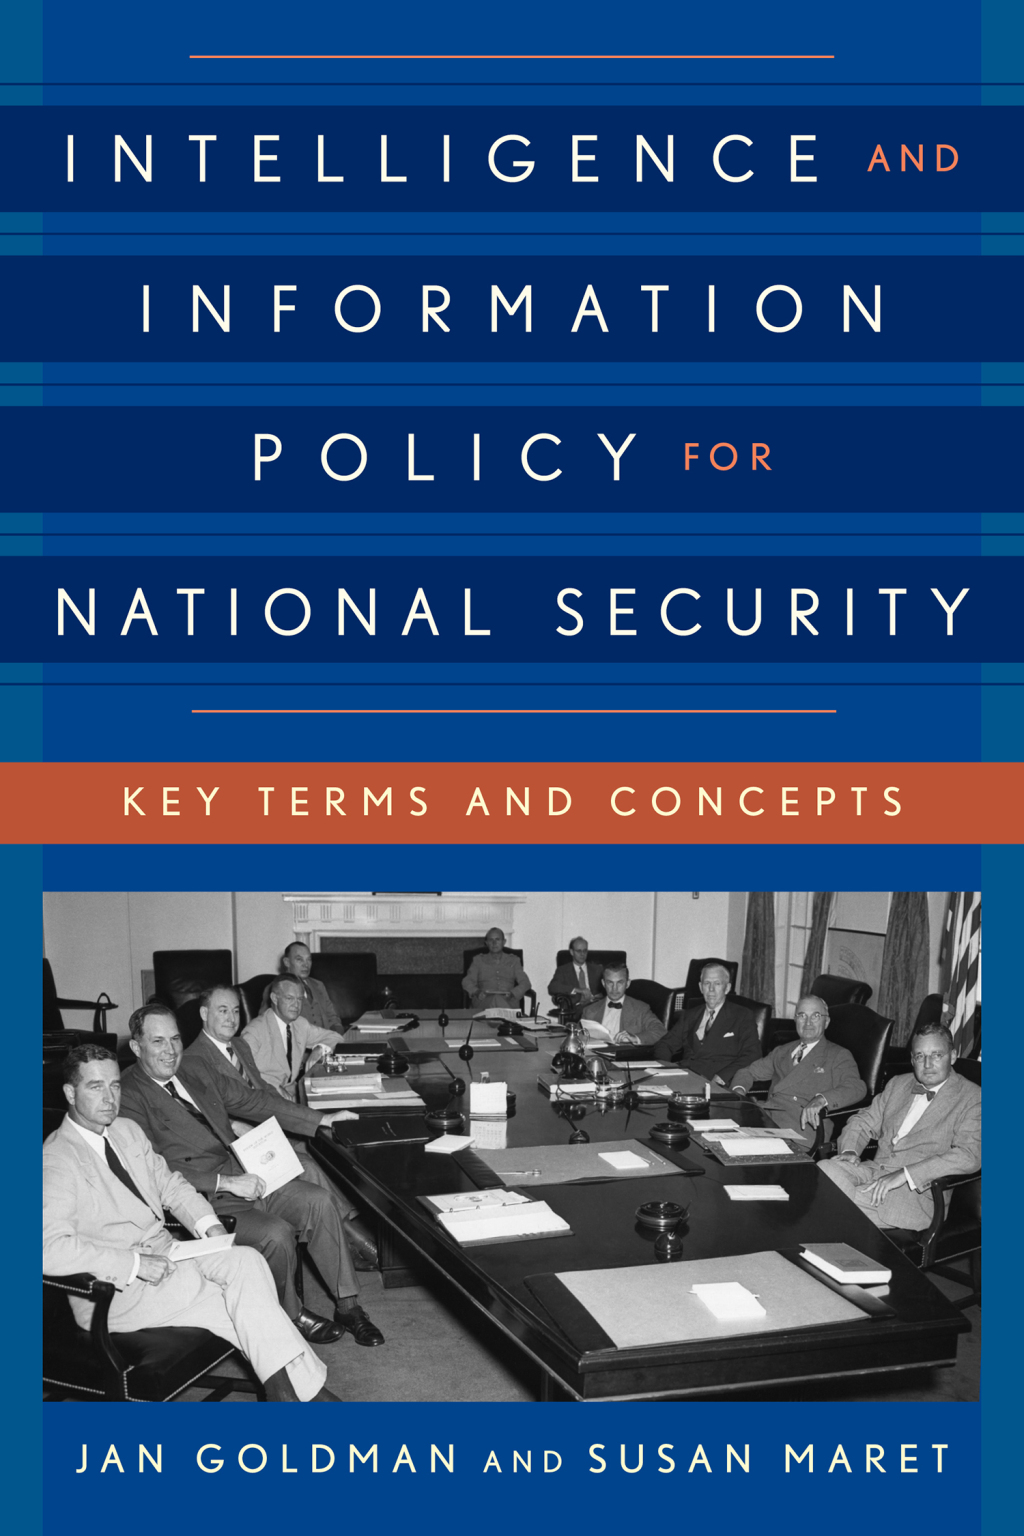 Intelligence and Information Policy for National Security (eBook) - Jan Goldman; Susan Maret